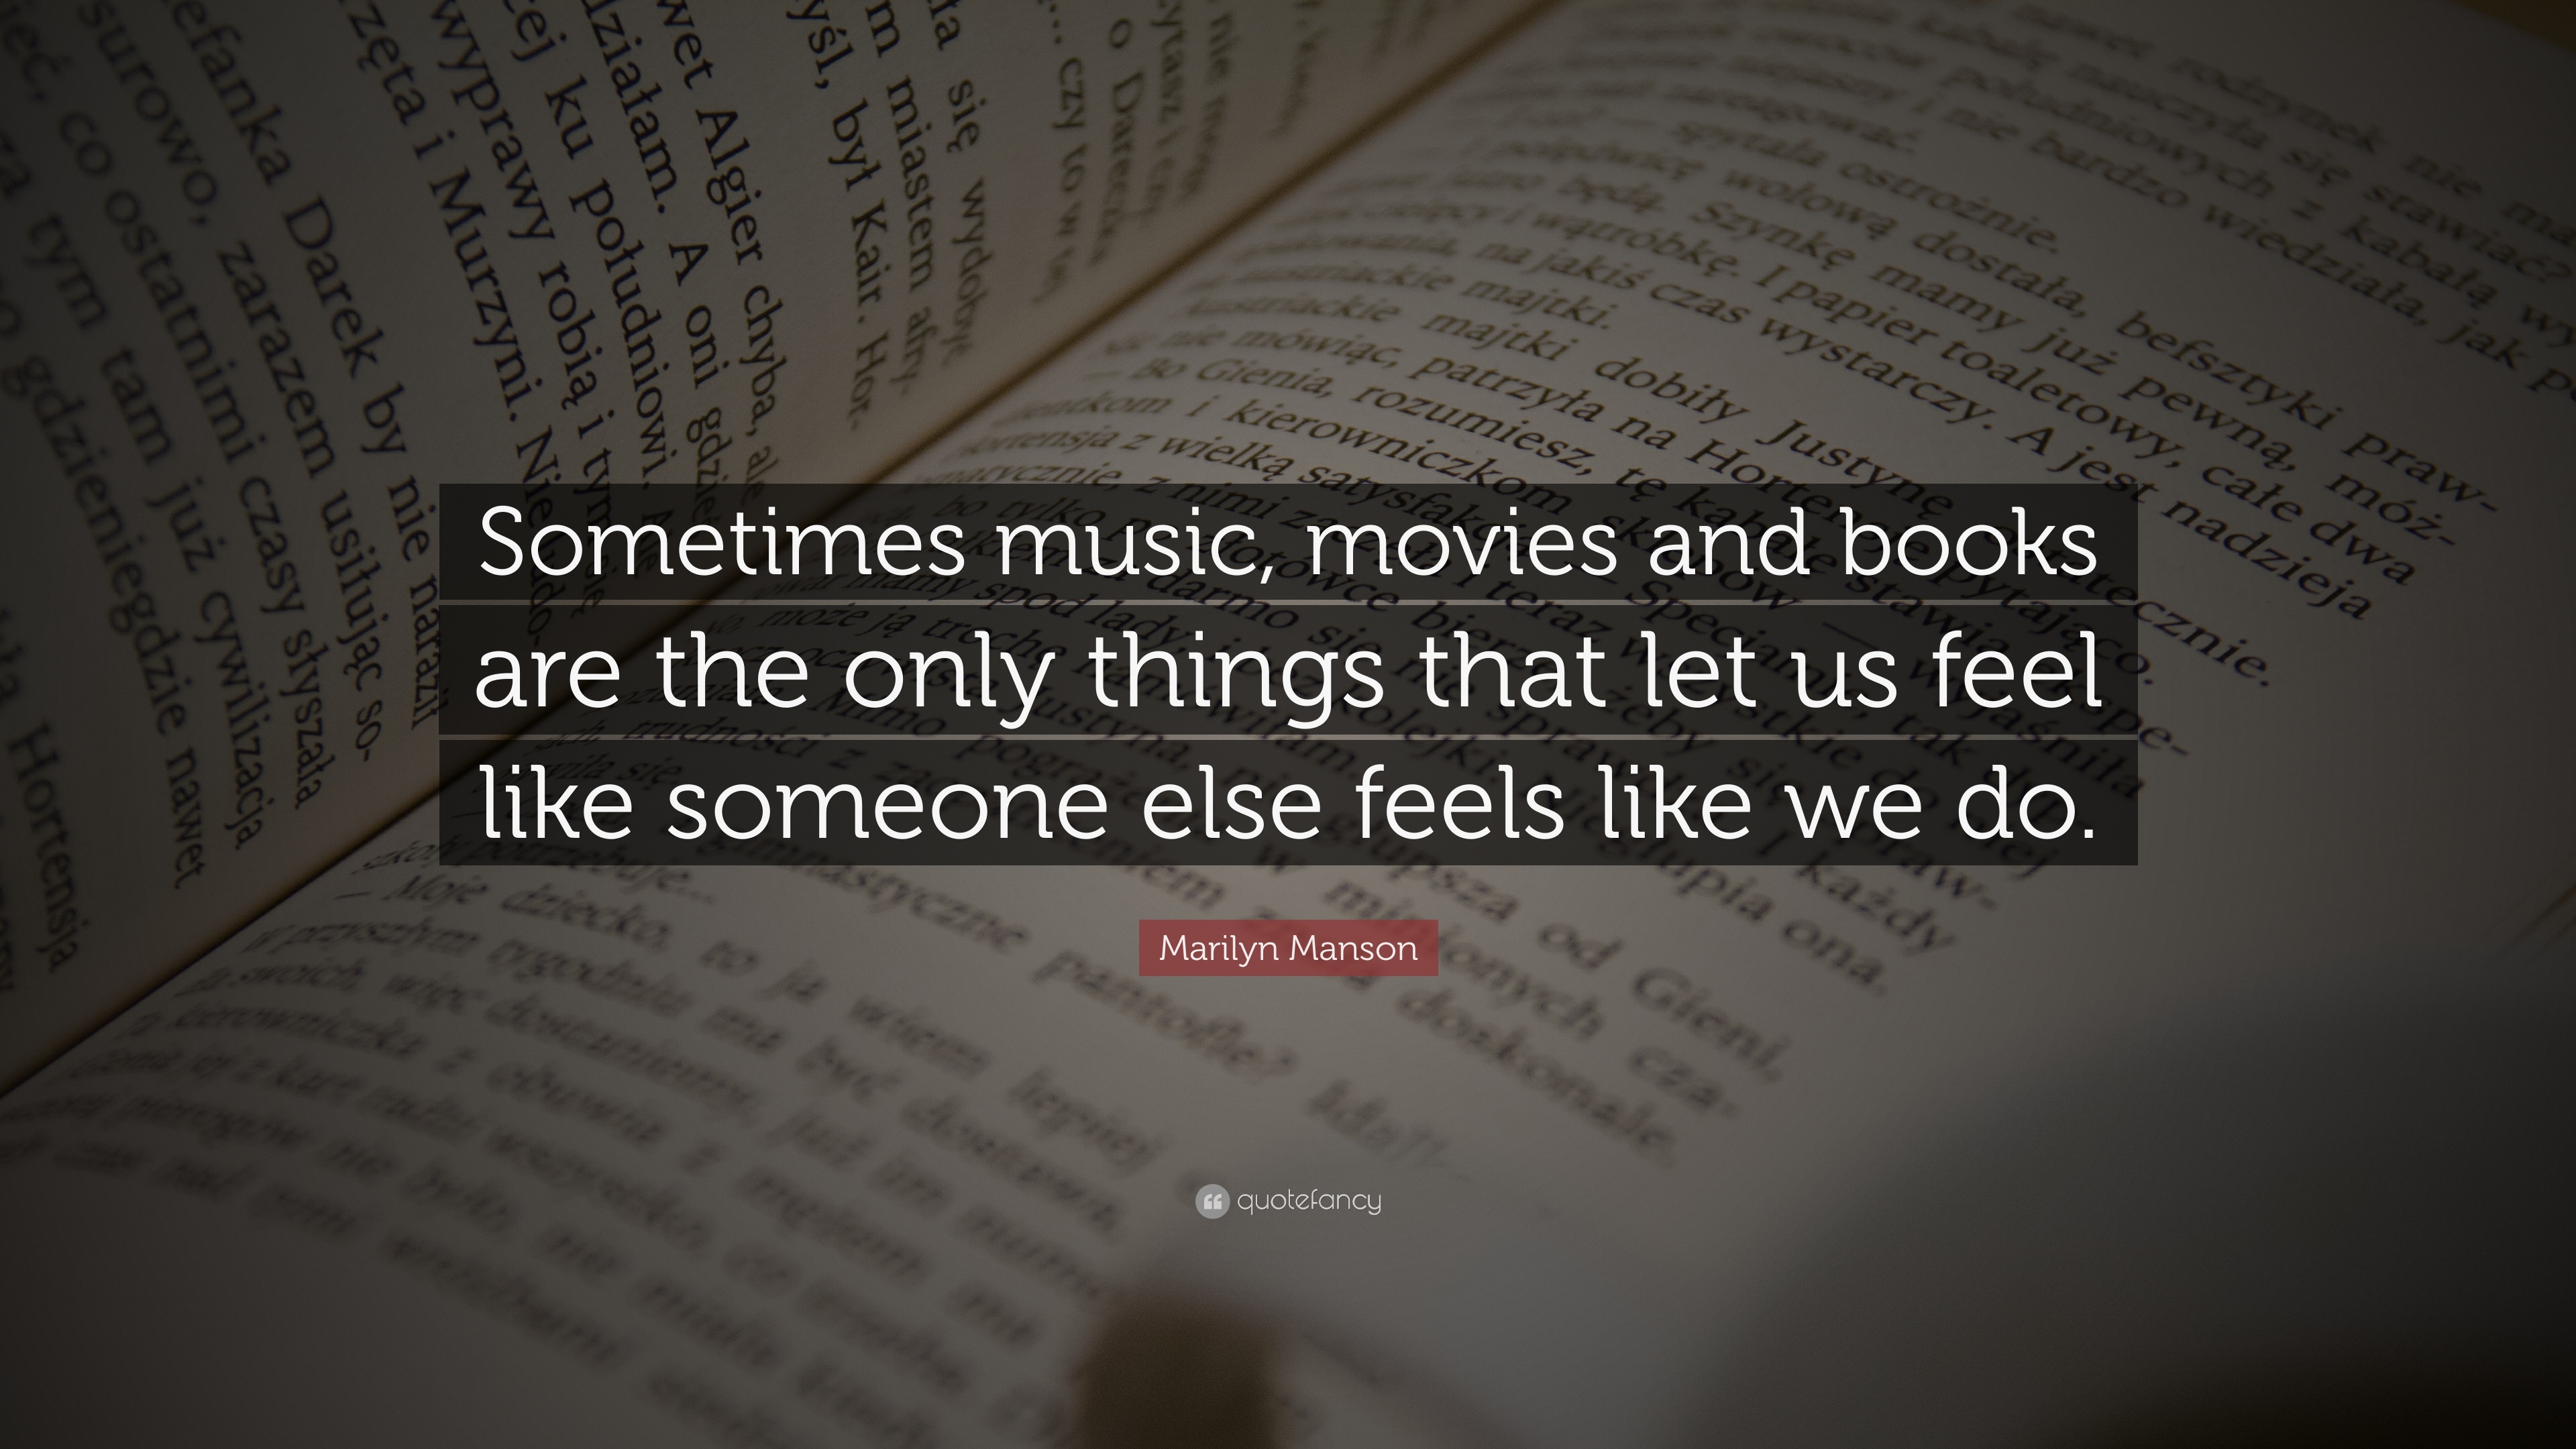 Marilyn Manson Quote: “Sometimes music, movies and books are the ...